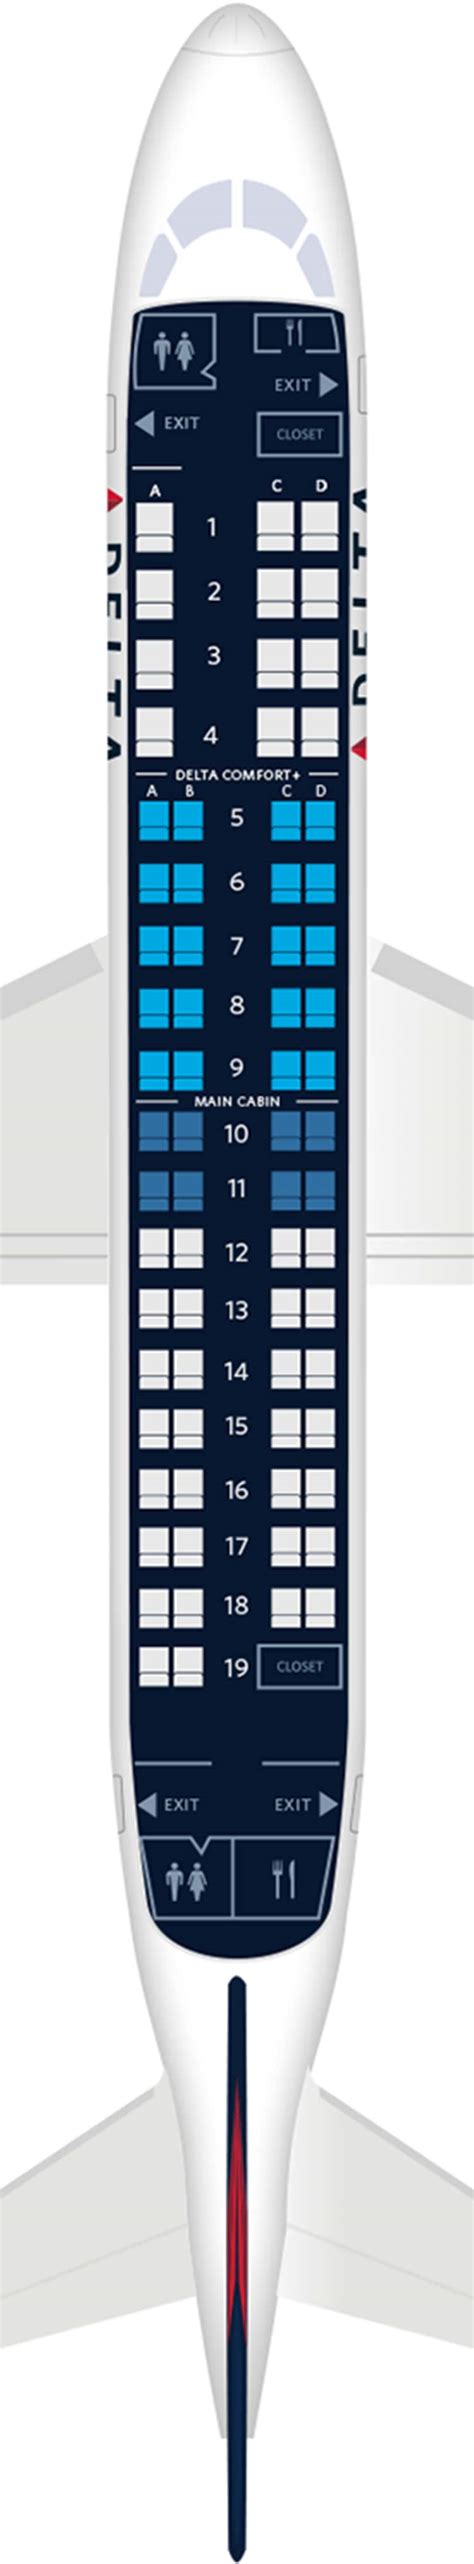 For your next United flight, use this seating chart to get the most comfortable seats, legroom, and recline on .. 